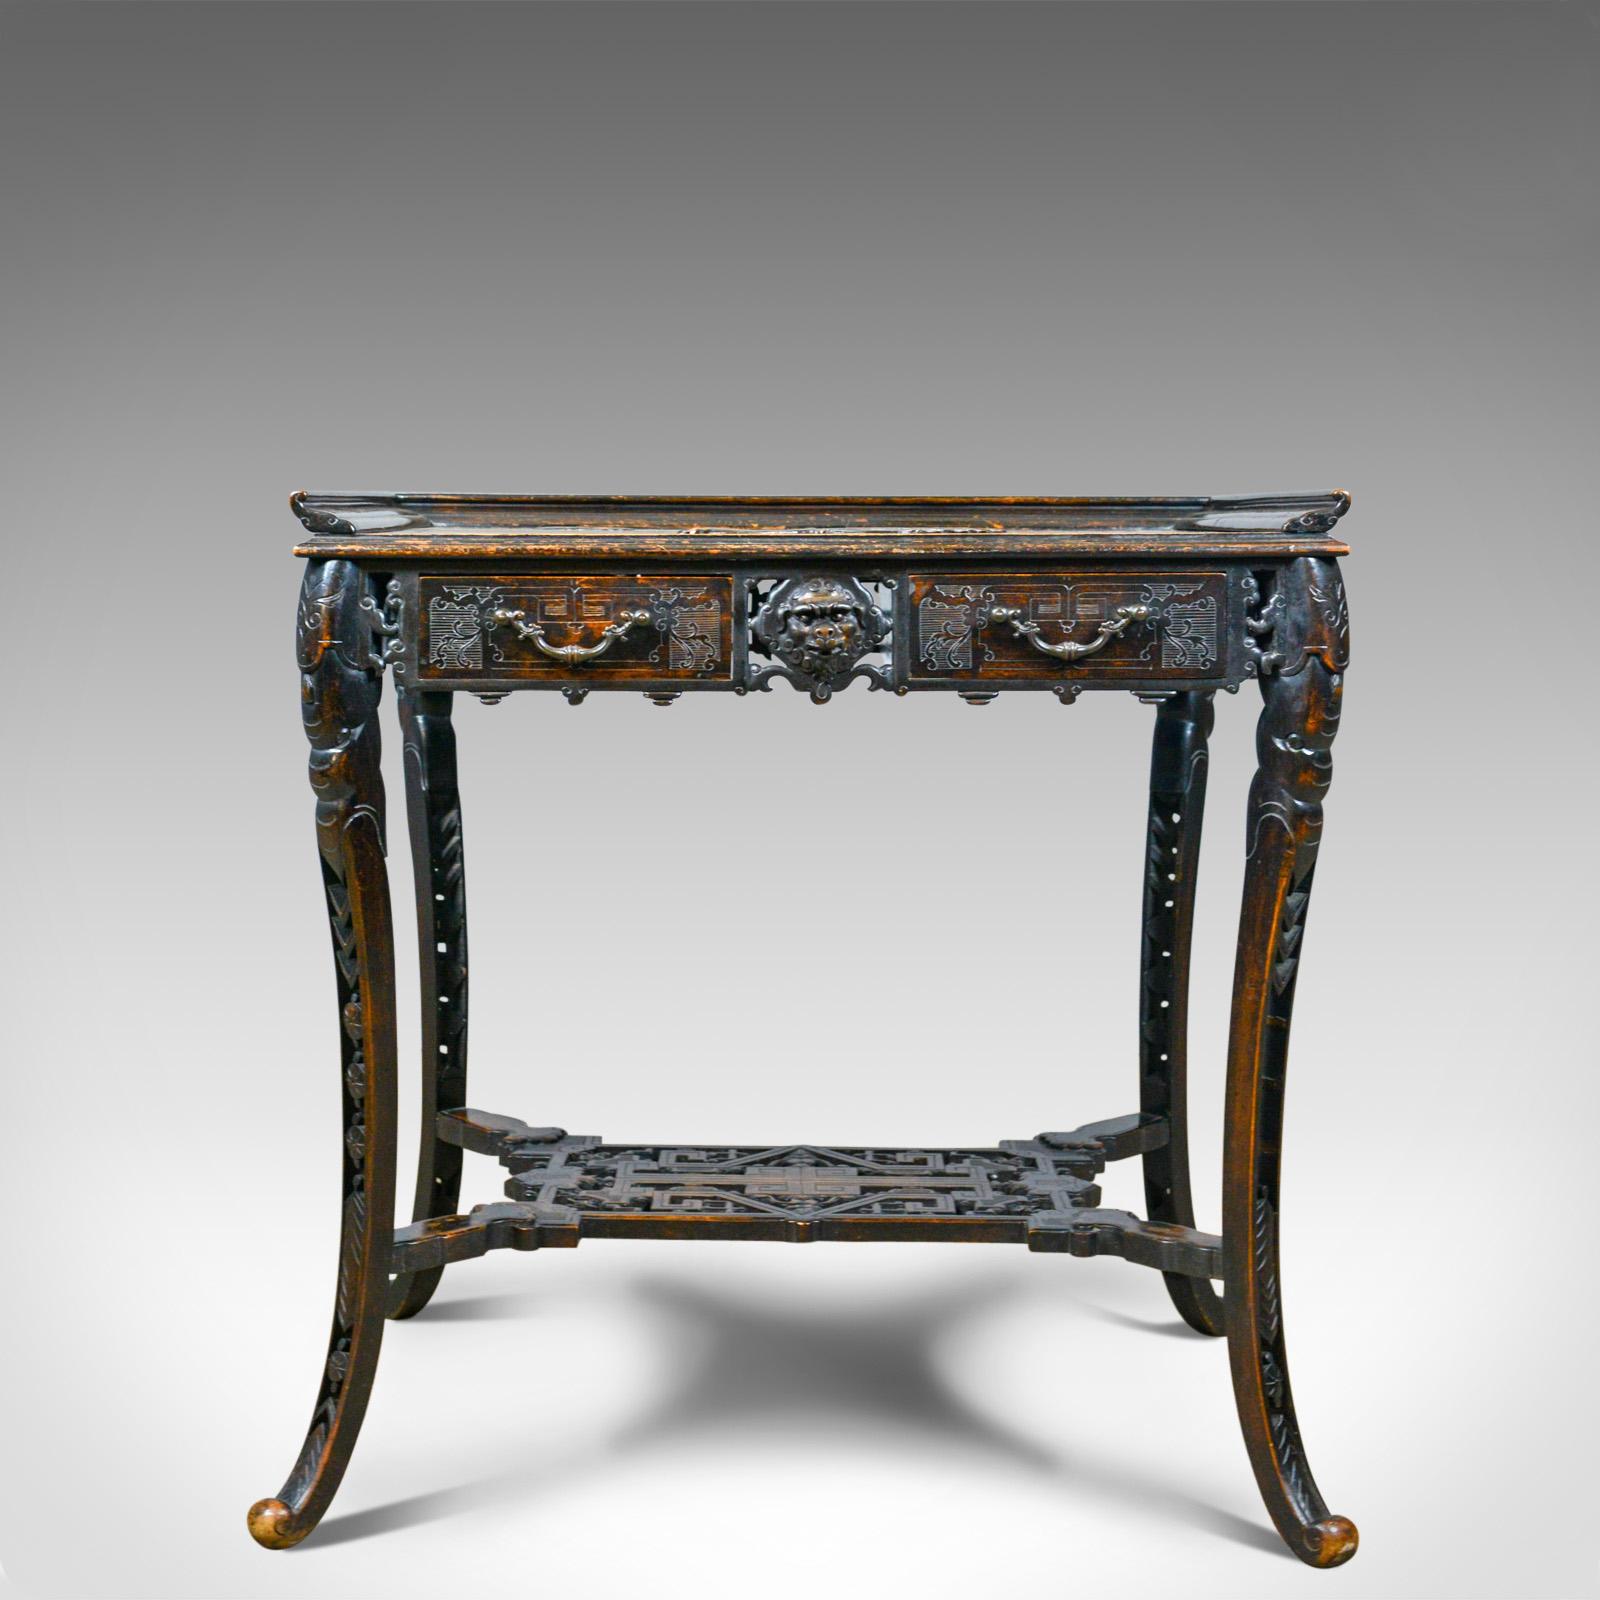 This is an antique Chinese export side table, a carved oriental table dating to the late Victorian period at the turn of the 20th century, circa 1900. 

In good proportion and of quality craftsmanship
The dark stained mahogany displays